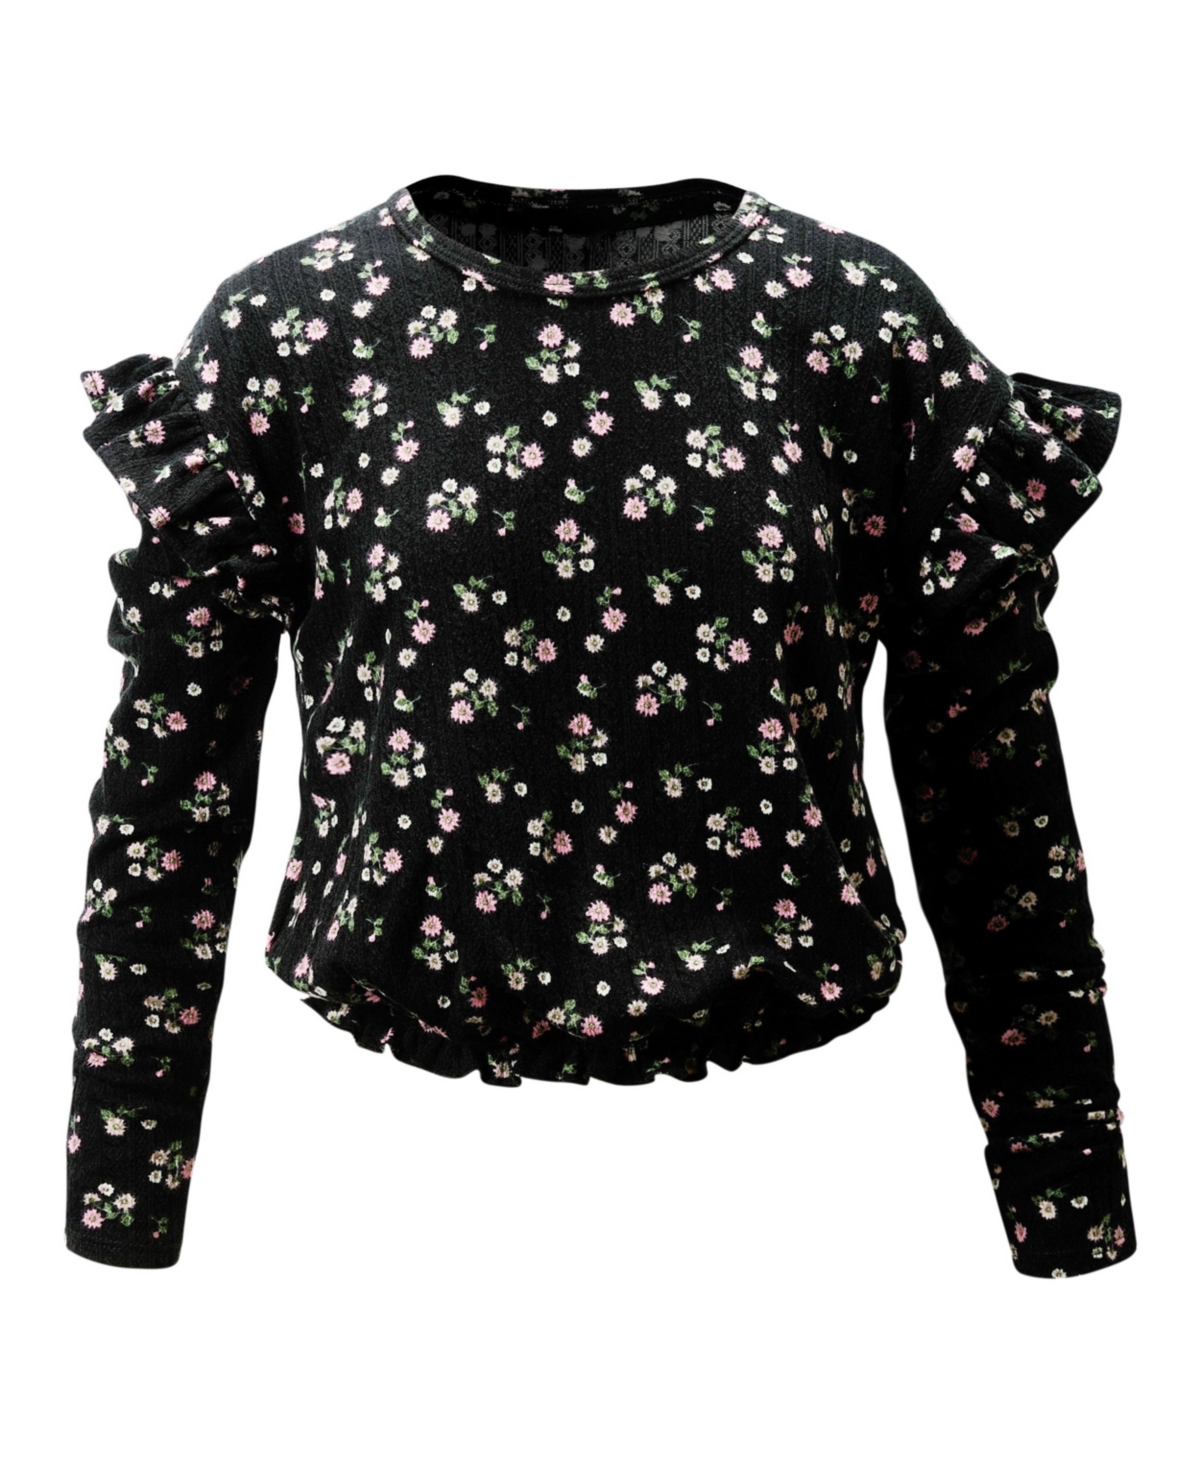 Colette Lilly Big Girls Ruffled Textured Long Sleeve Top In Black Floral